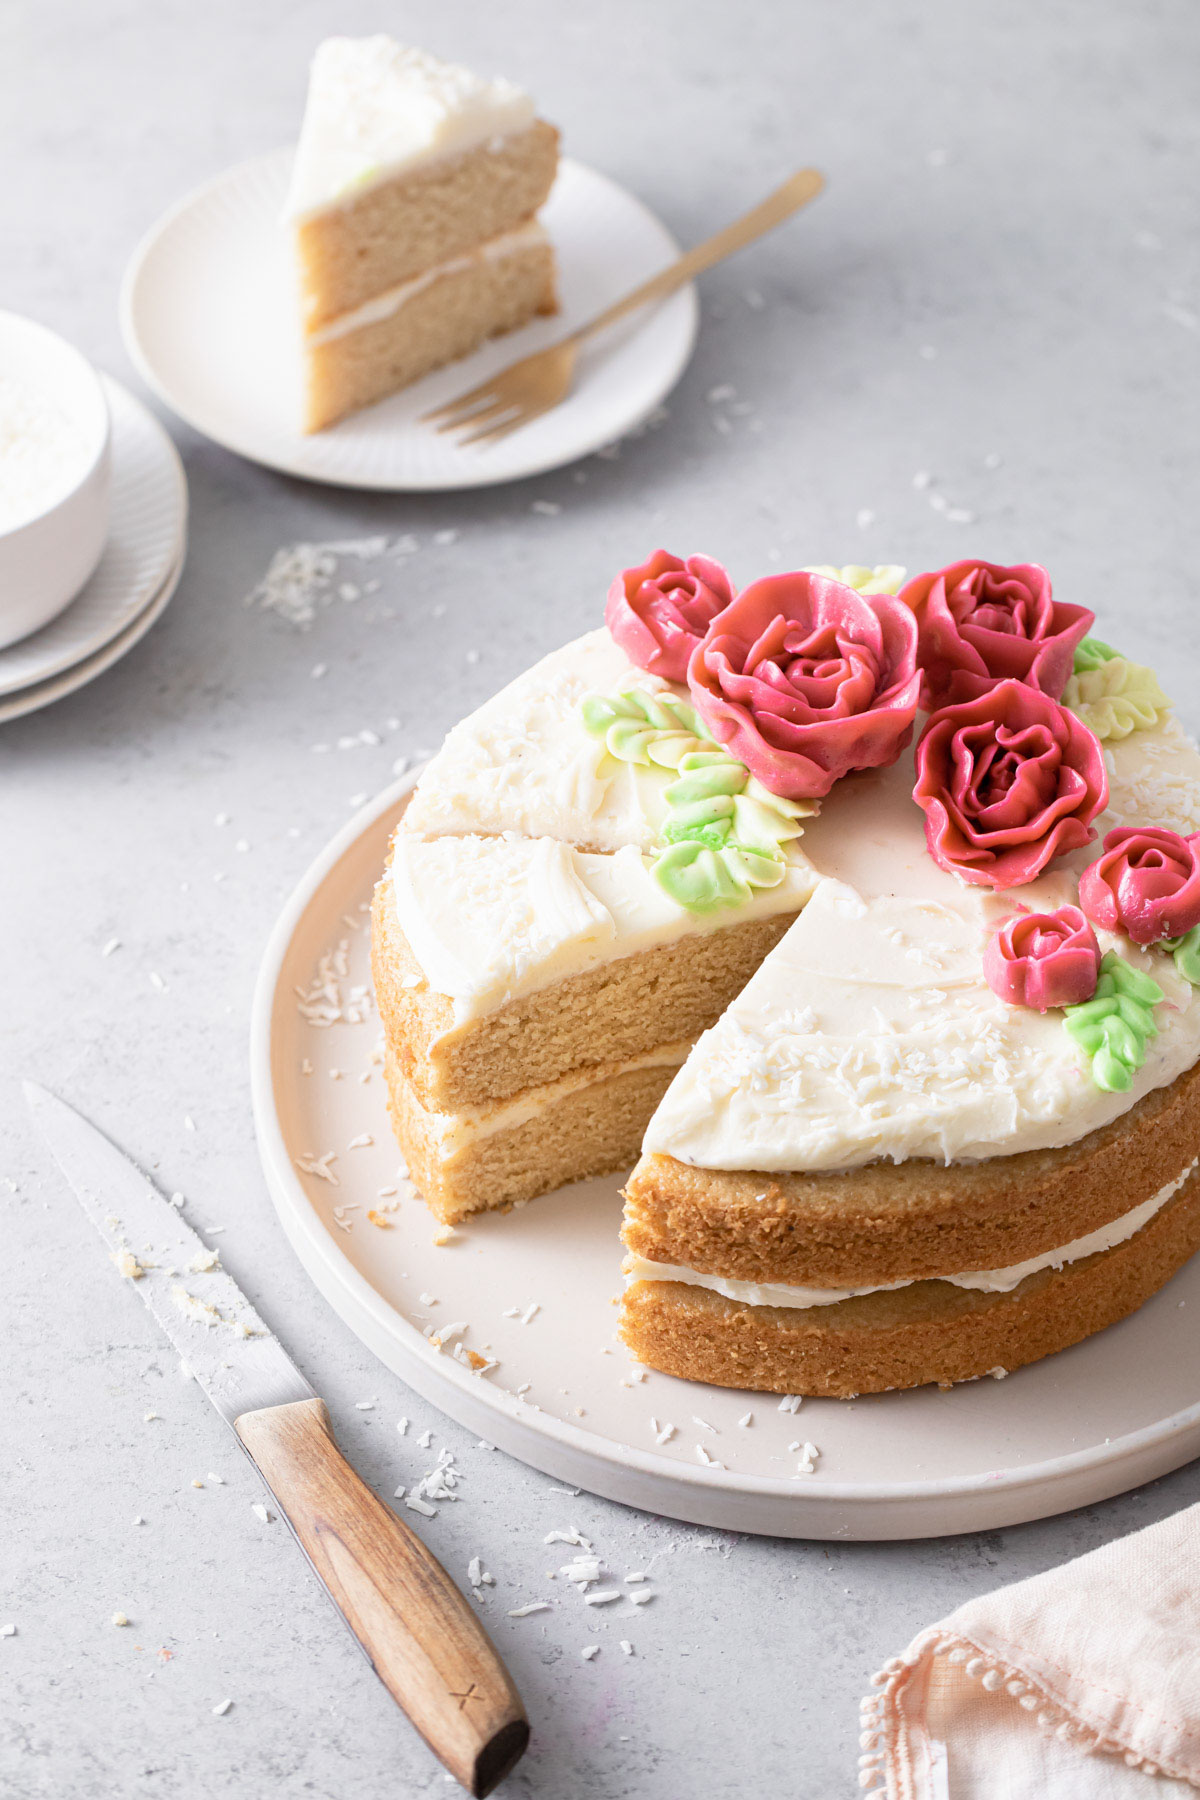 A two-layer almond cake with cream cheese frosting and pink buttercream roses on top that has been sliced